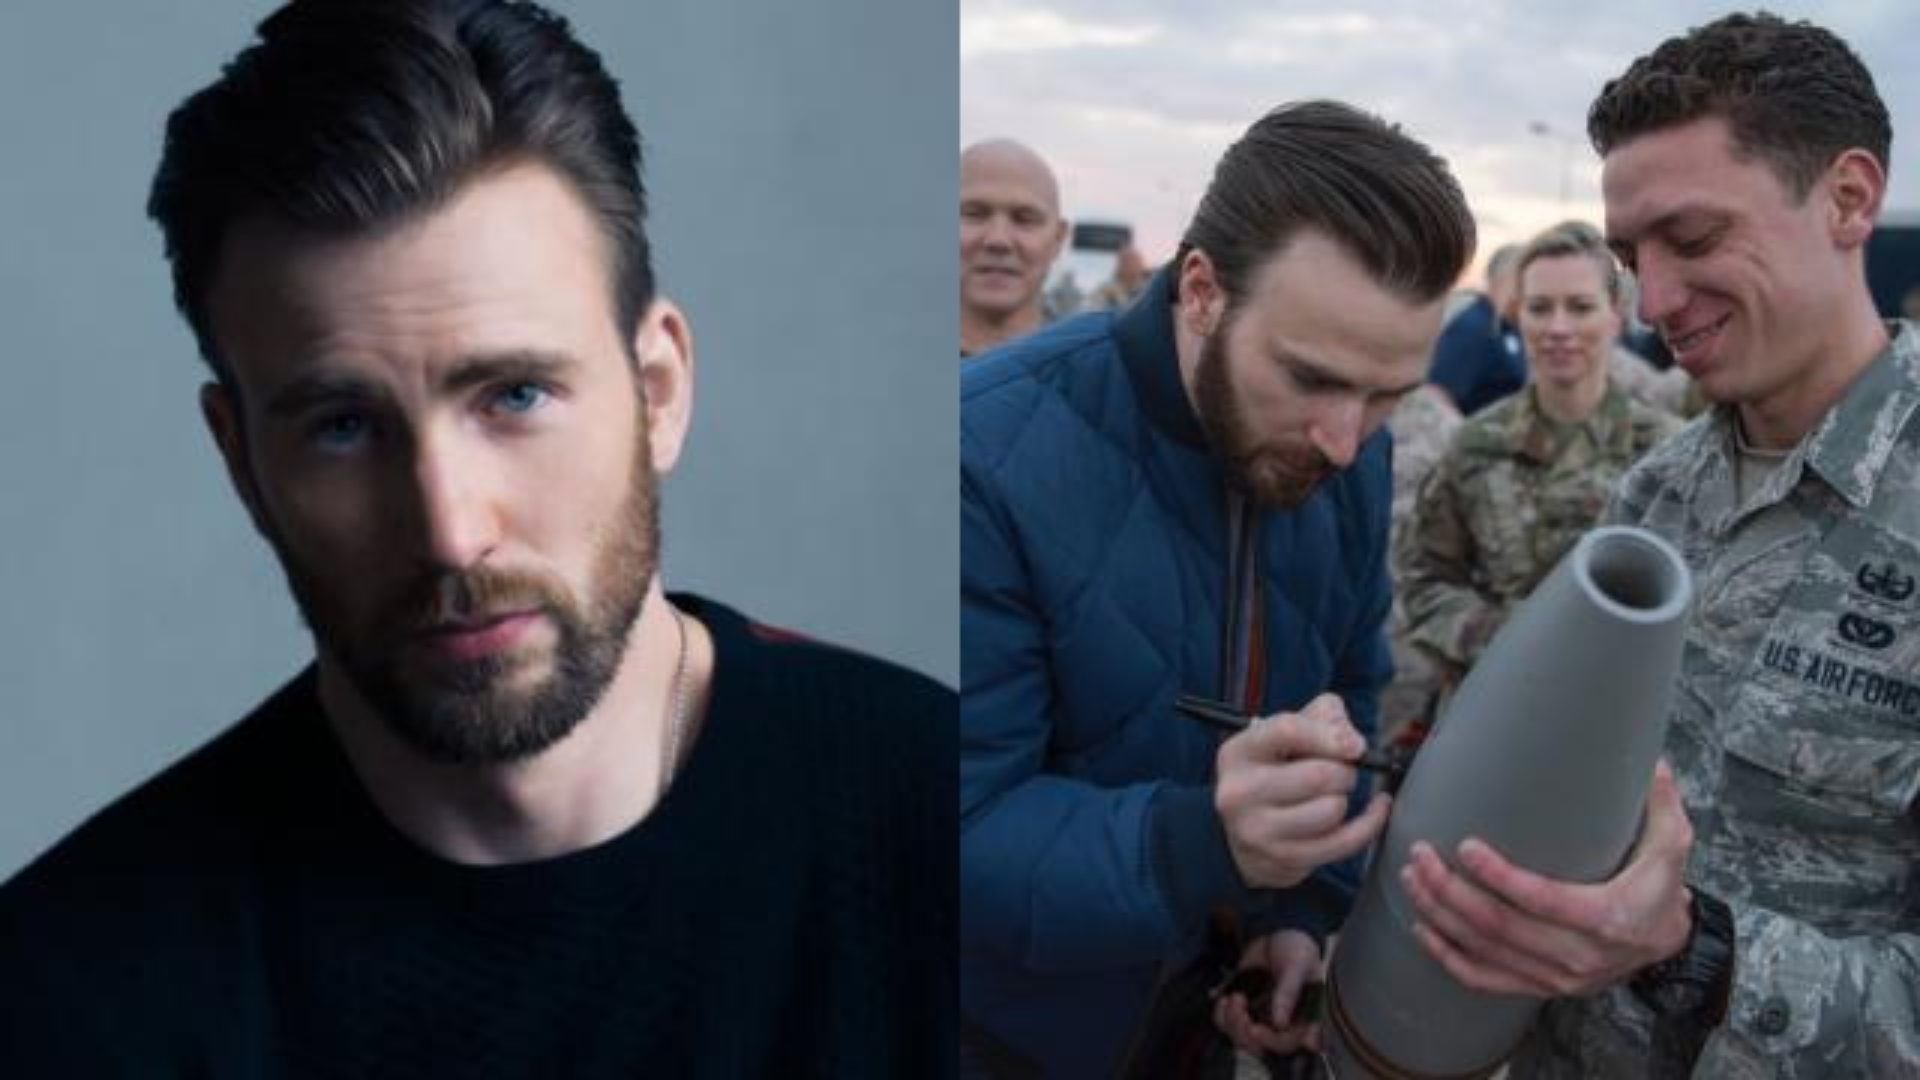 Chris Evans Photo Signing 'Israeli missile' Goes Viral: Here's What He Responds